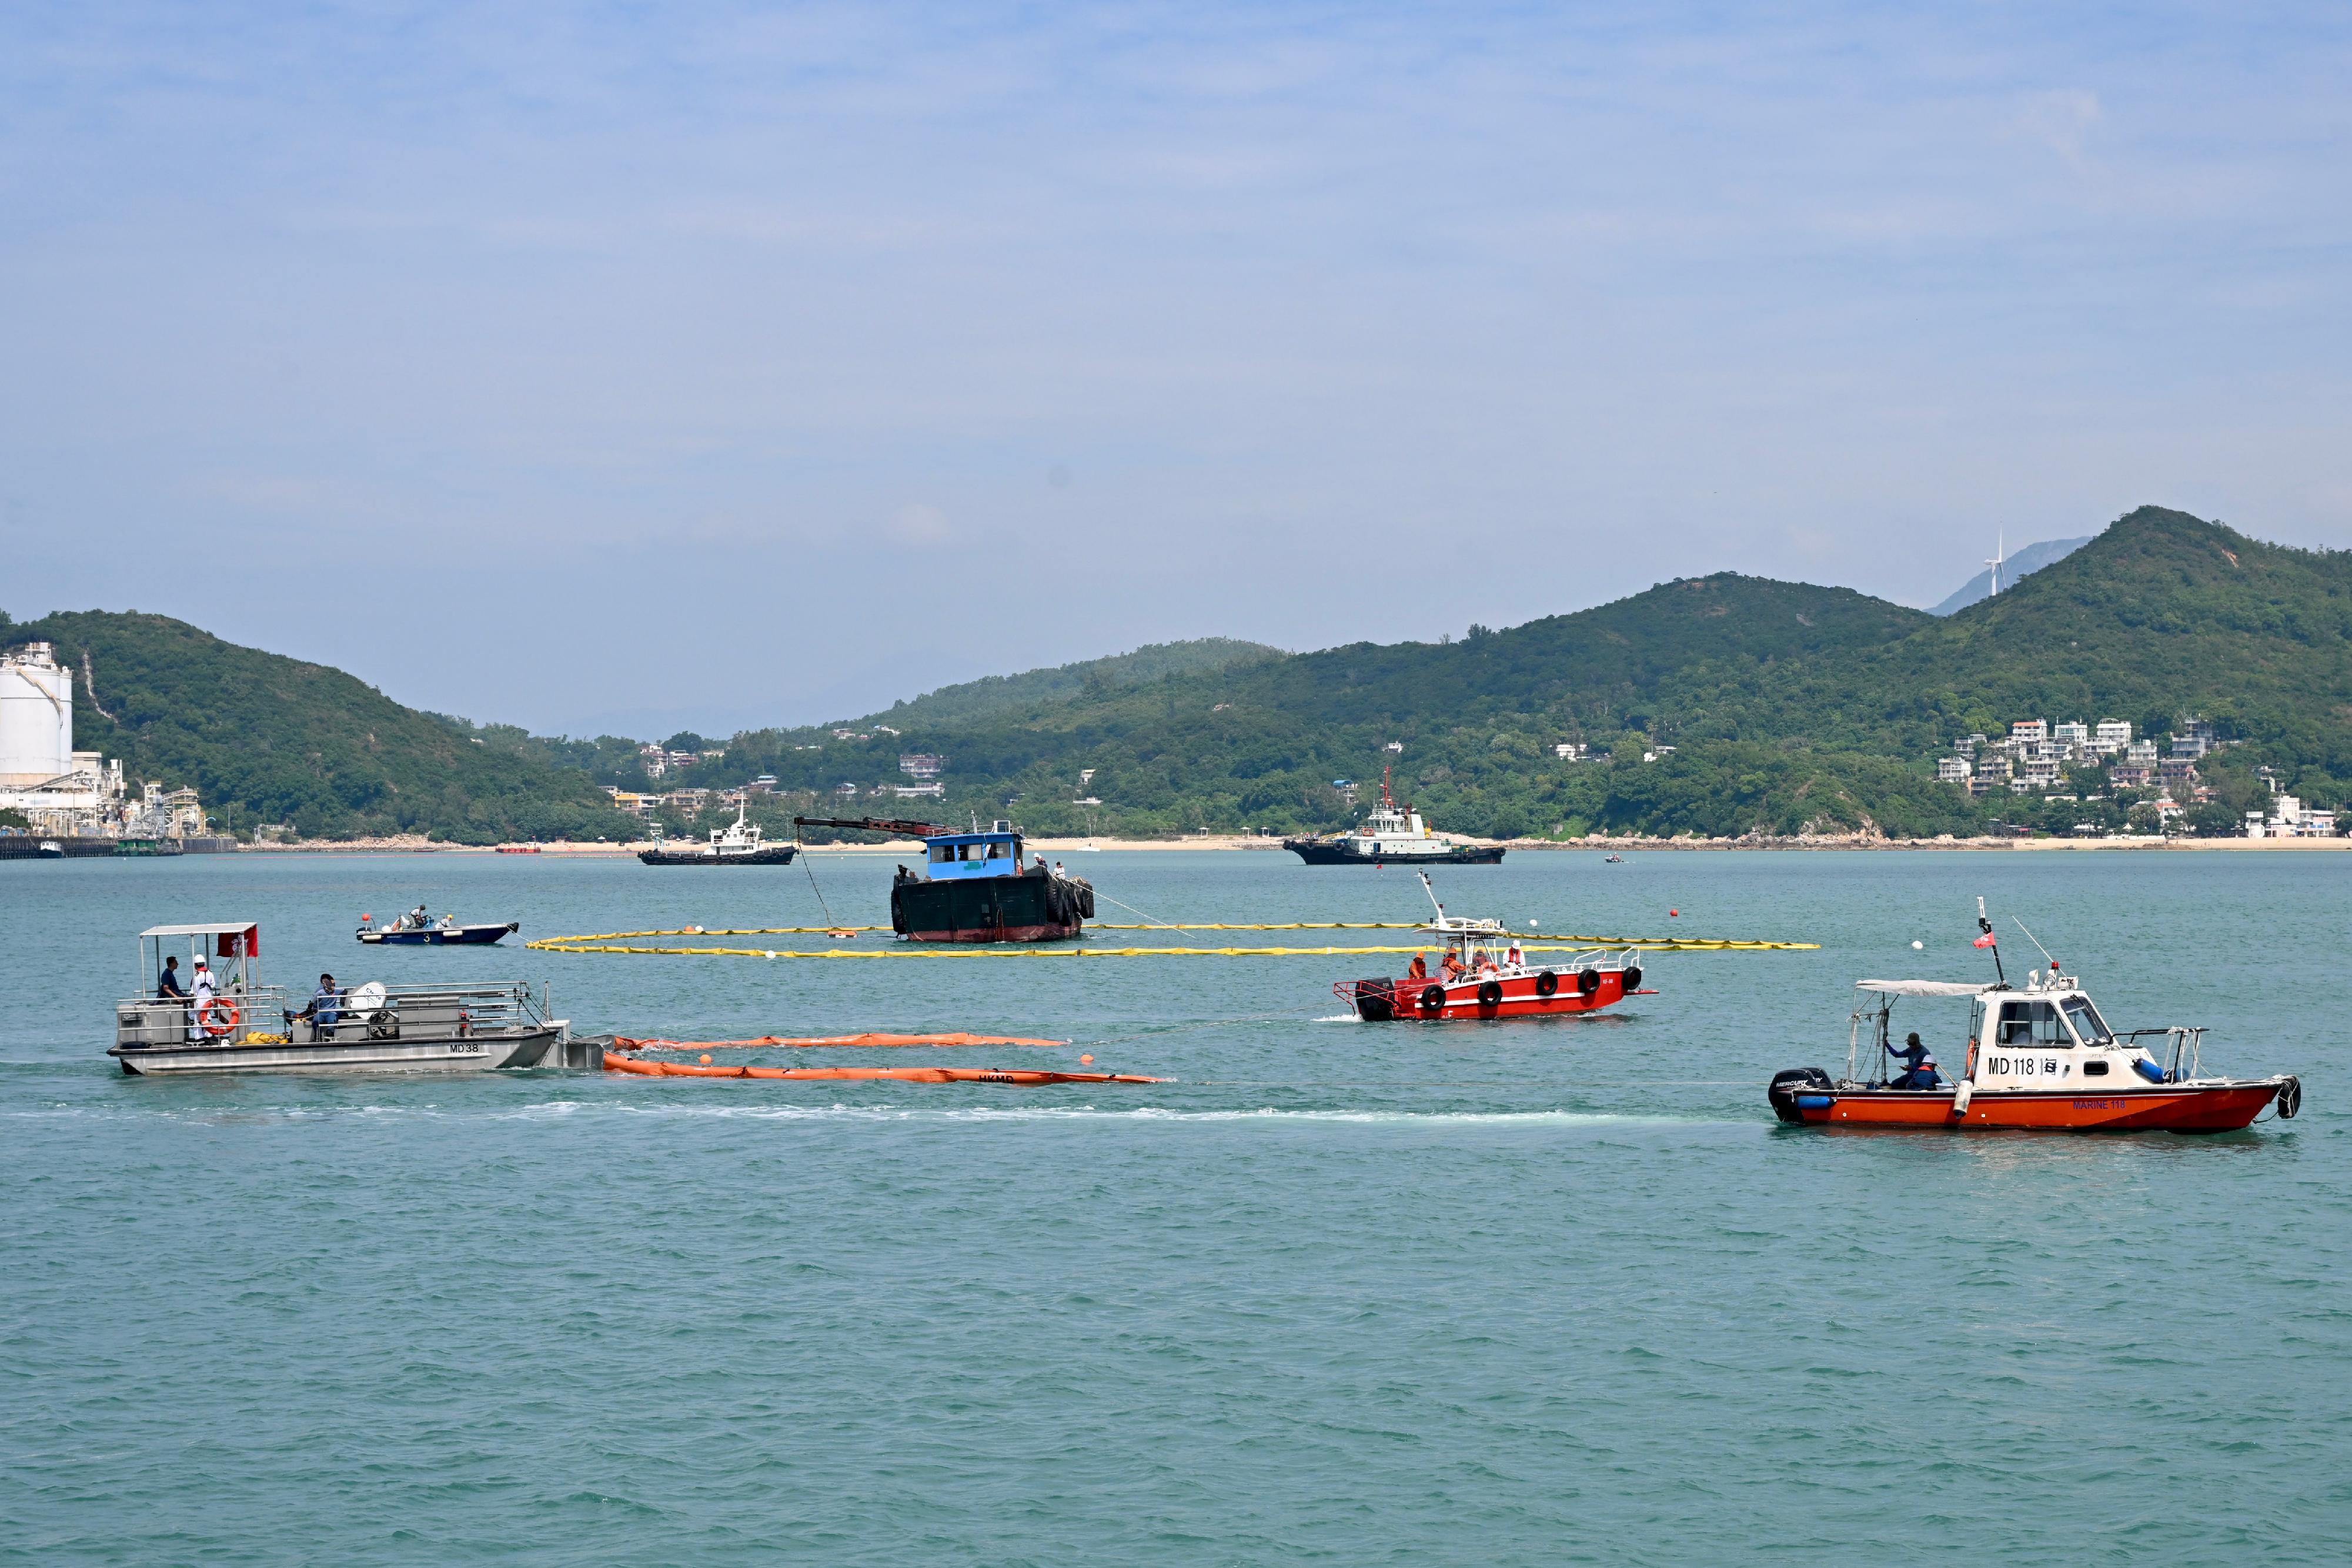 The annual marine pollution joint response exercises, code-named Oilex 2023 and Maritime Hazardous and Noxious Substances (HNS) 2023, were conducted by various government departments this morning (October 26) in the waters west of Lamma Island to test their marine pollution responses in the event of spillage of oil and HNS in Hong Kong waters. Photo shows an oil pollution combat team deploying floating booms as barrier to prevent the spill from spreading.